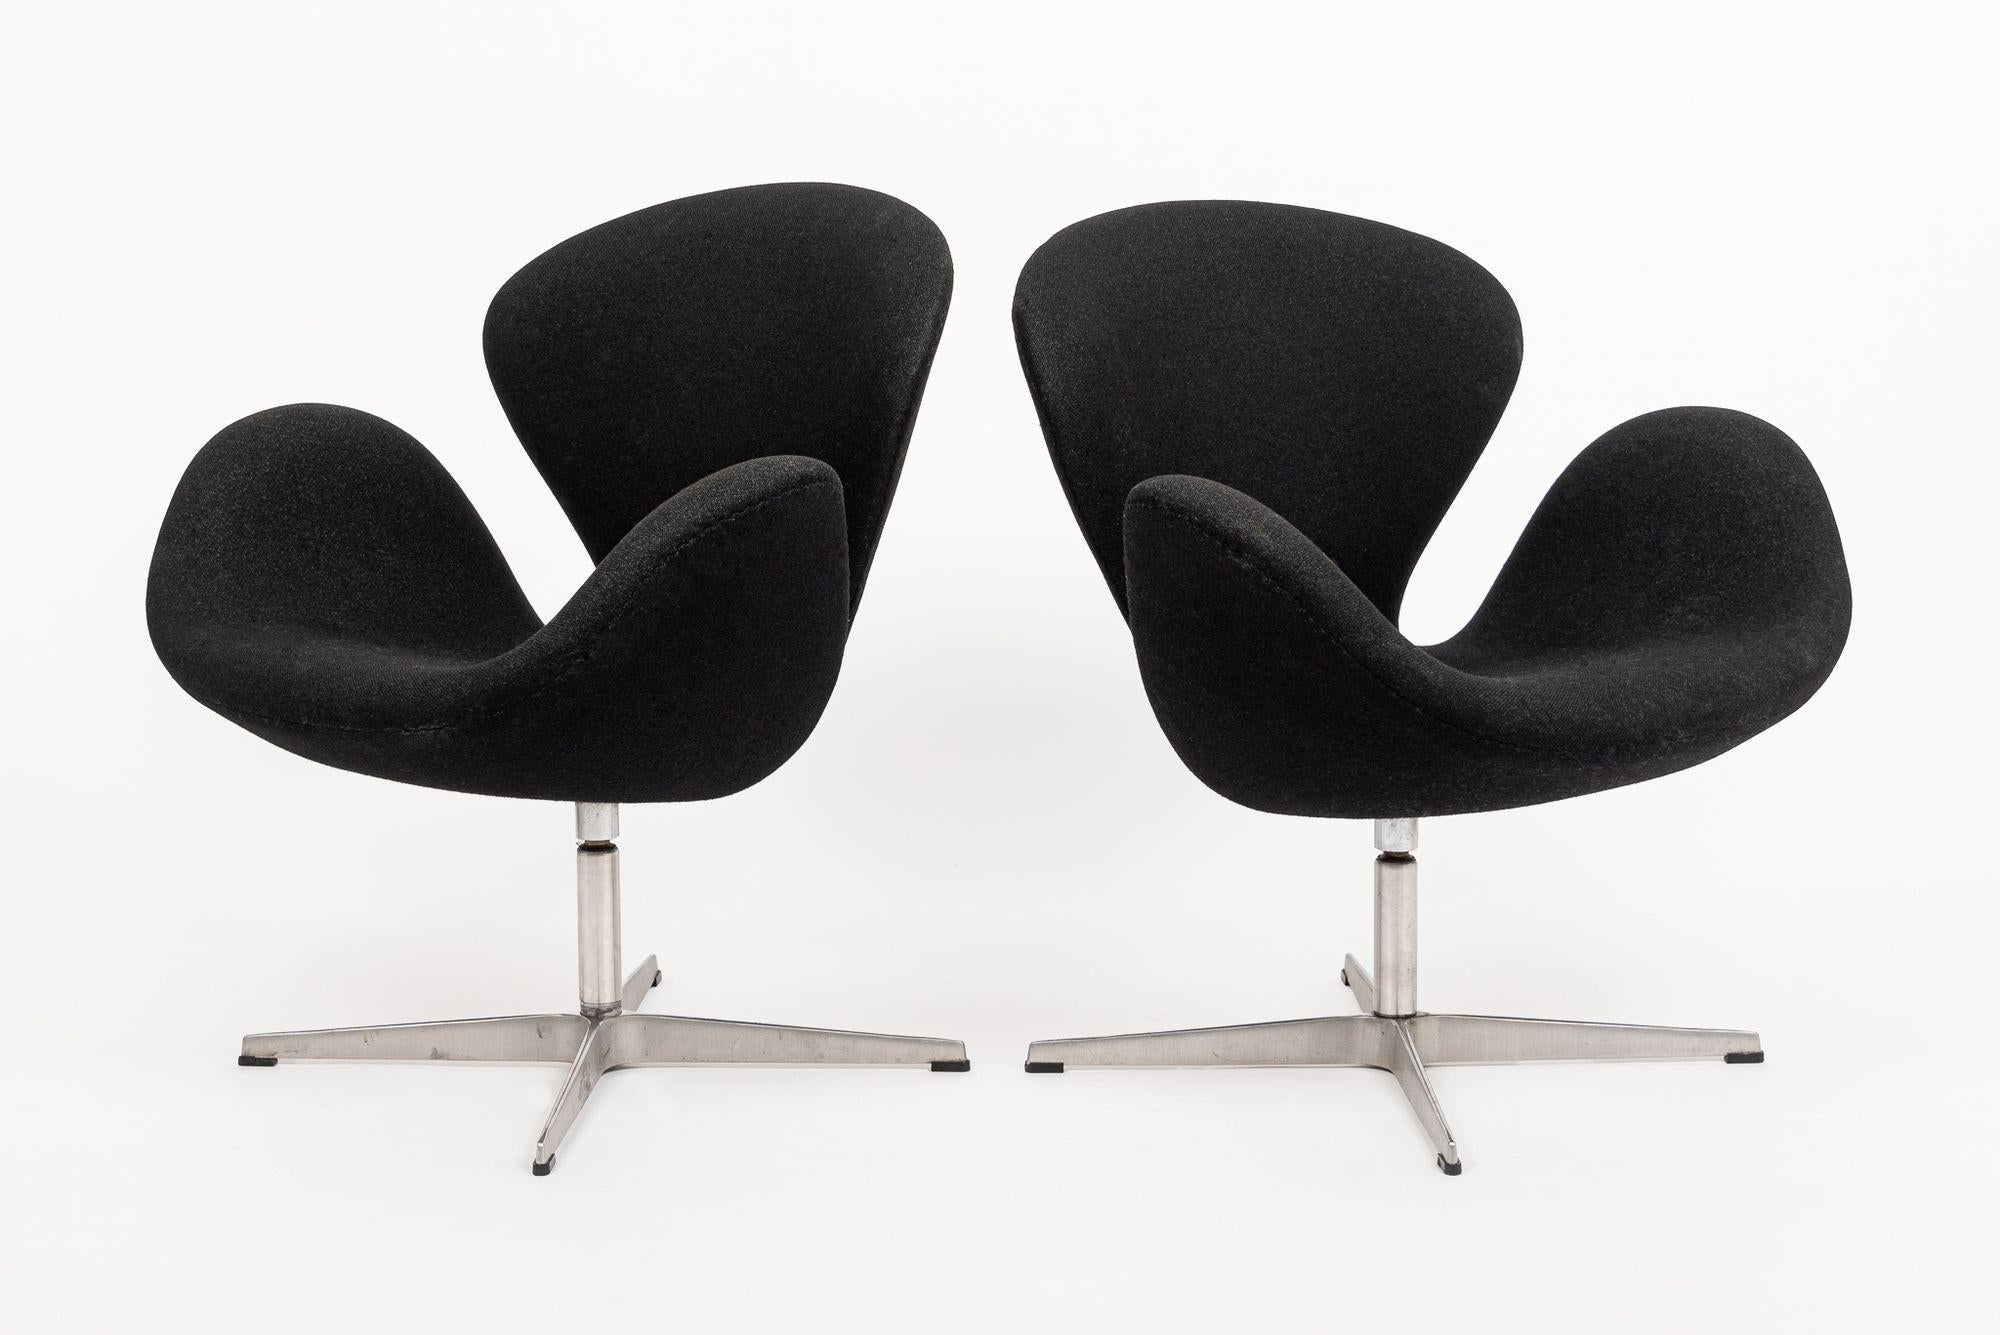 This gorgeous pair of vintage mid century Danish modern black Swan chairs by Arne Jacobsen for Fritz Hansen were made in Denmark and produced in 2002. They feature a 4-star aluminum swivel base and black woven upholstery. Both chairs retain Fritz